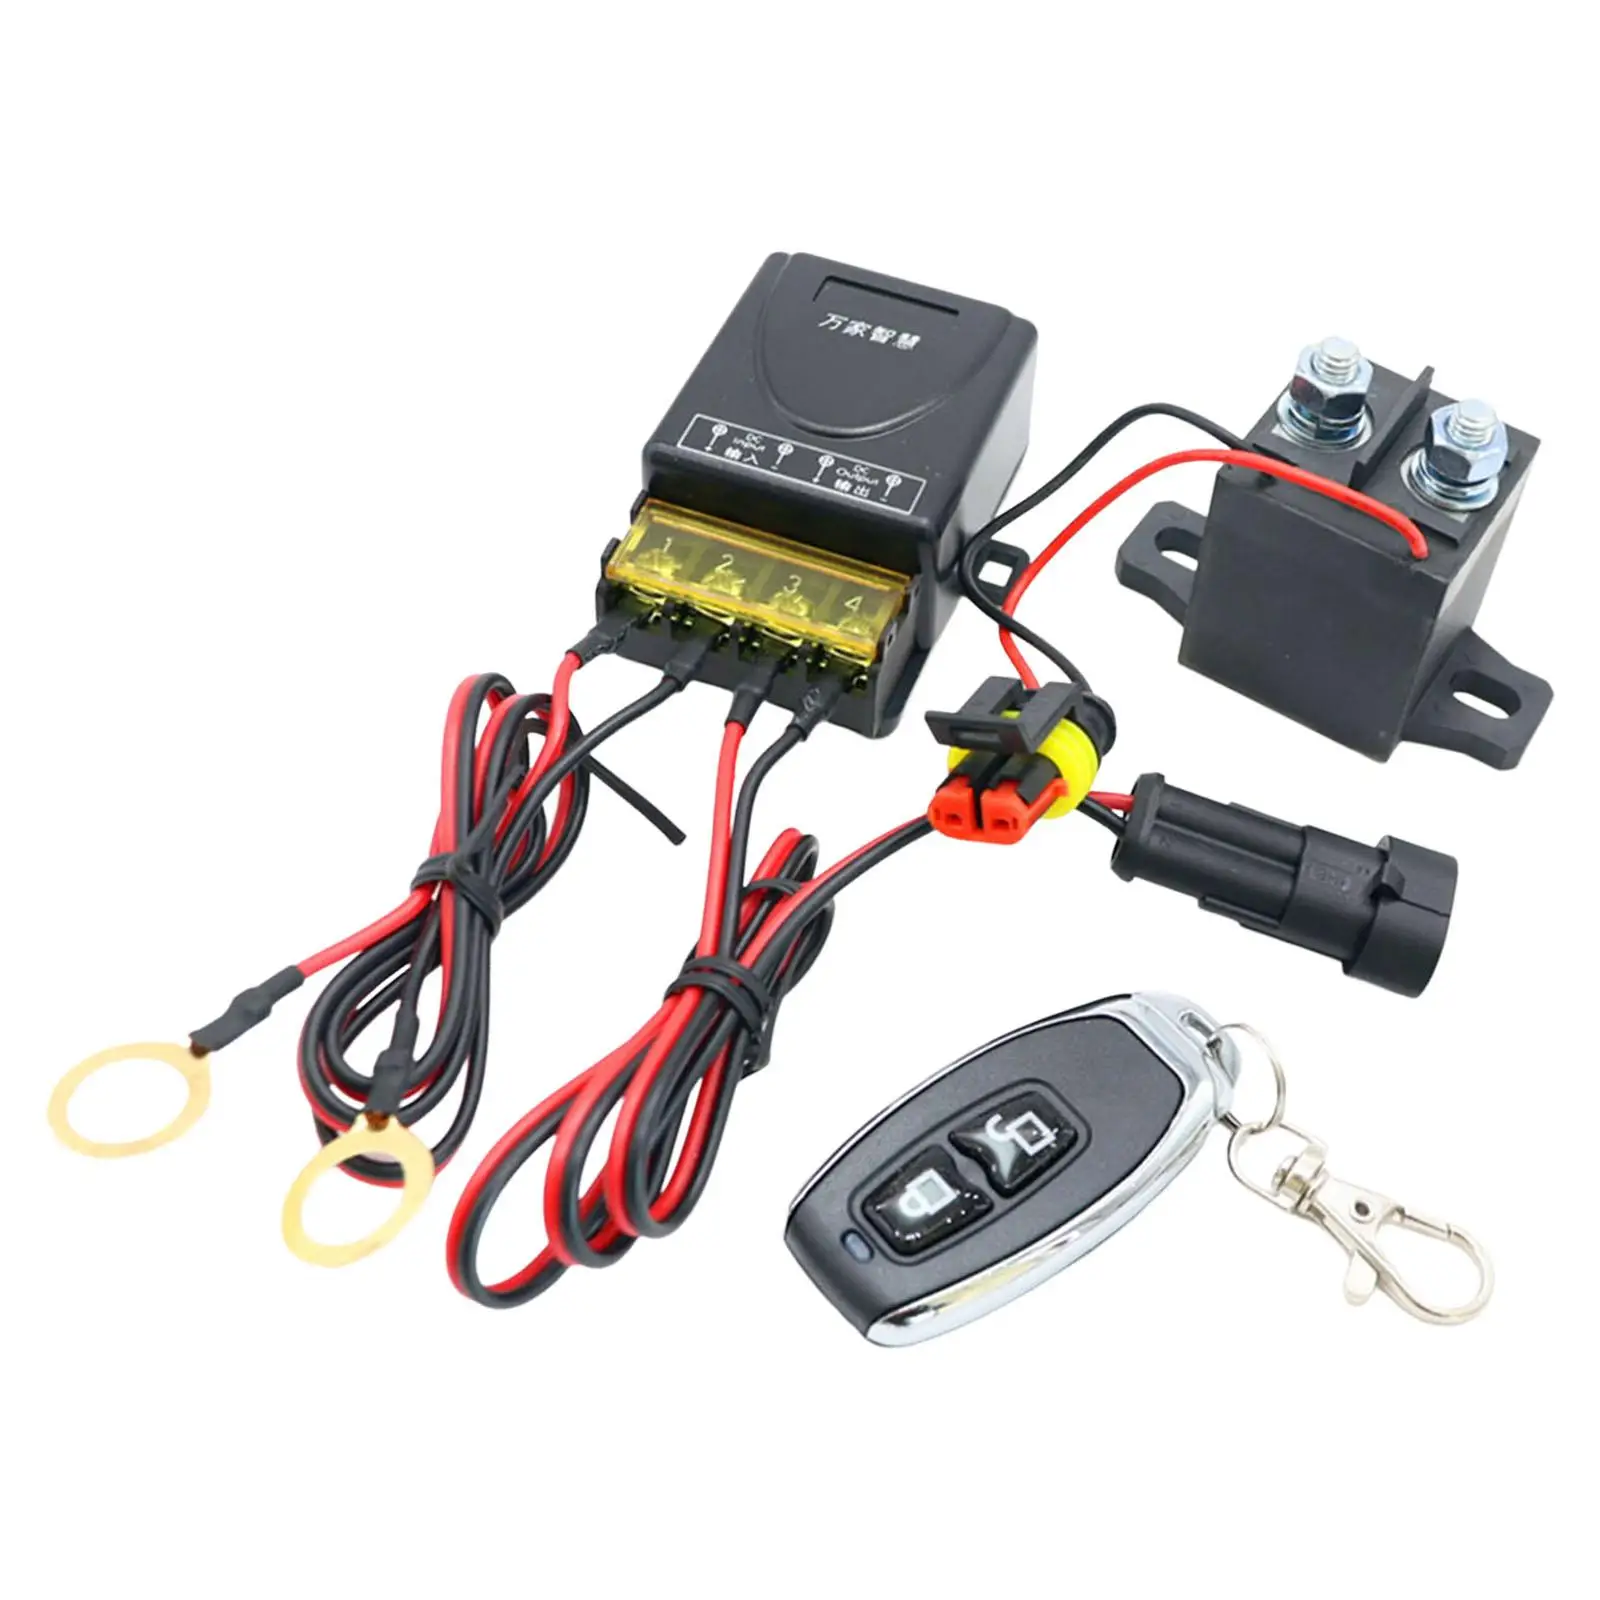 

Remote Control 150A Starter Relay power Switch Automobile with Harness Start Motor Durable Supplies Metal Parts